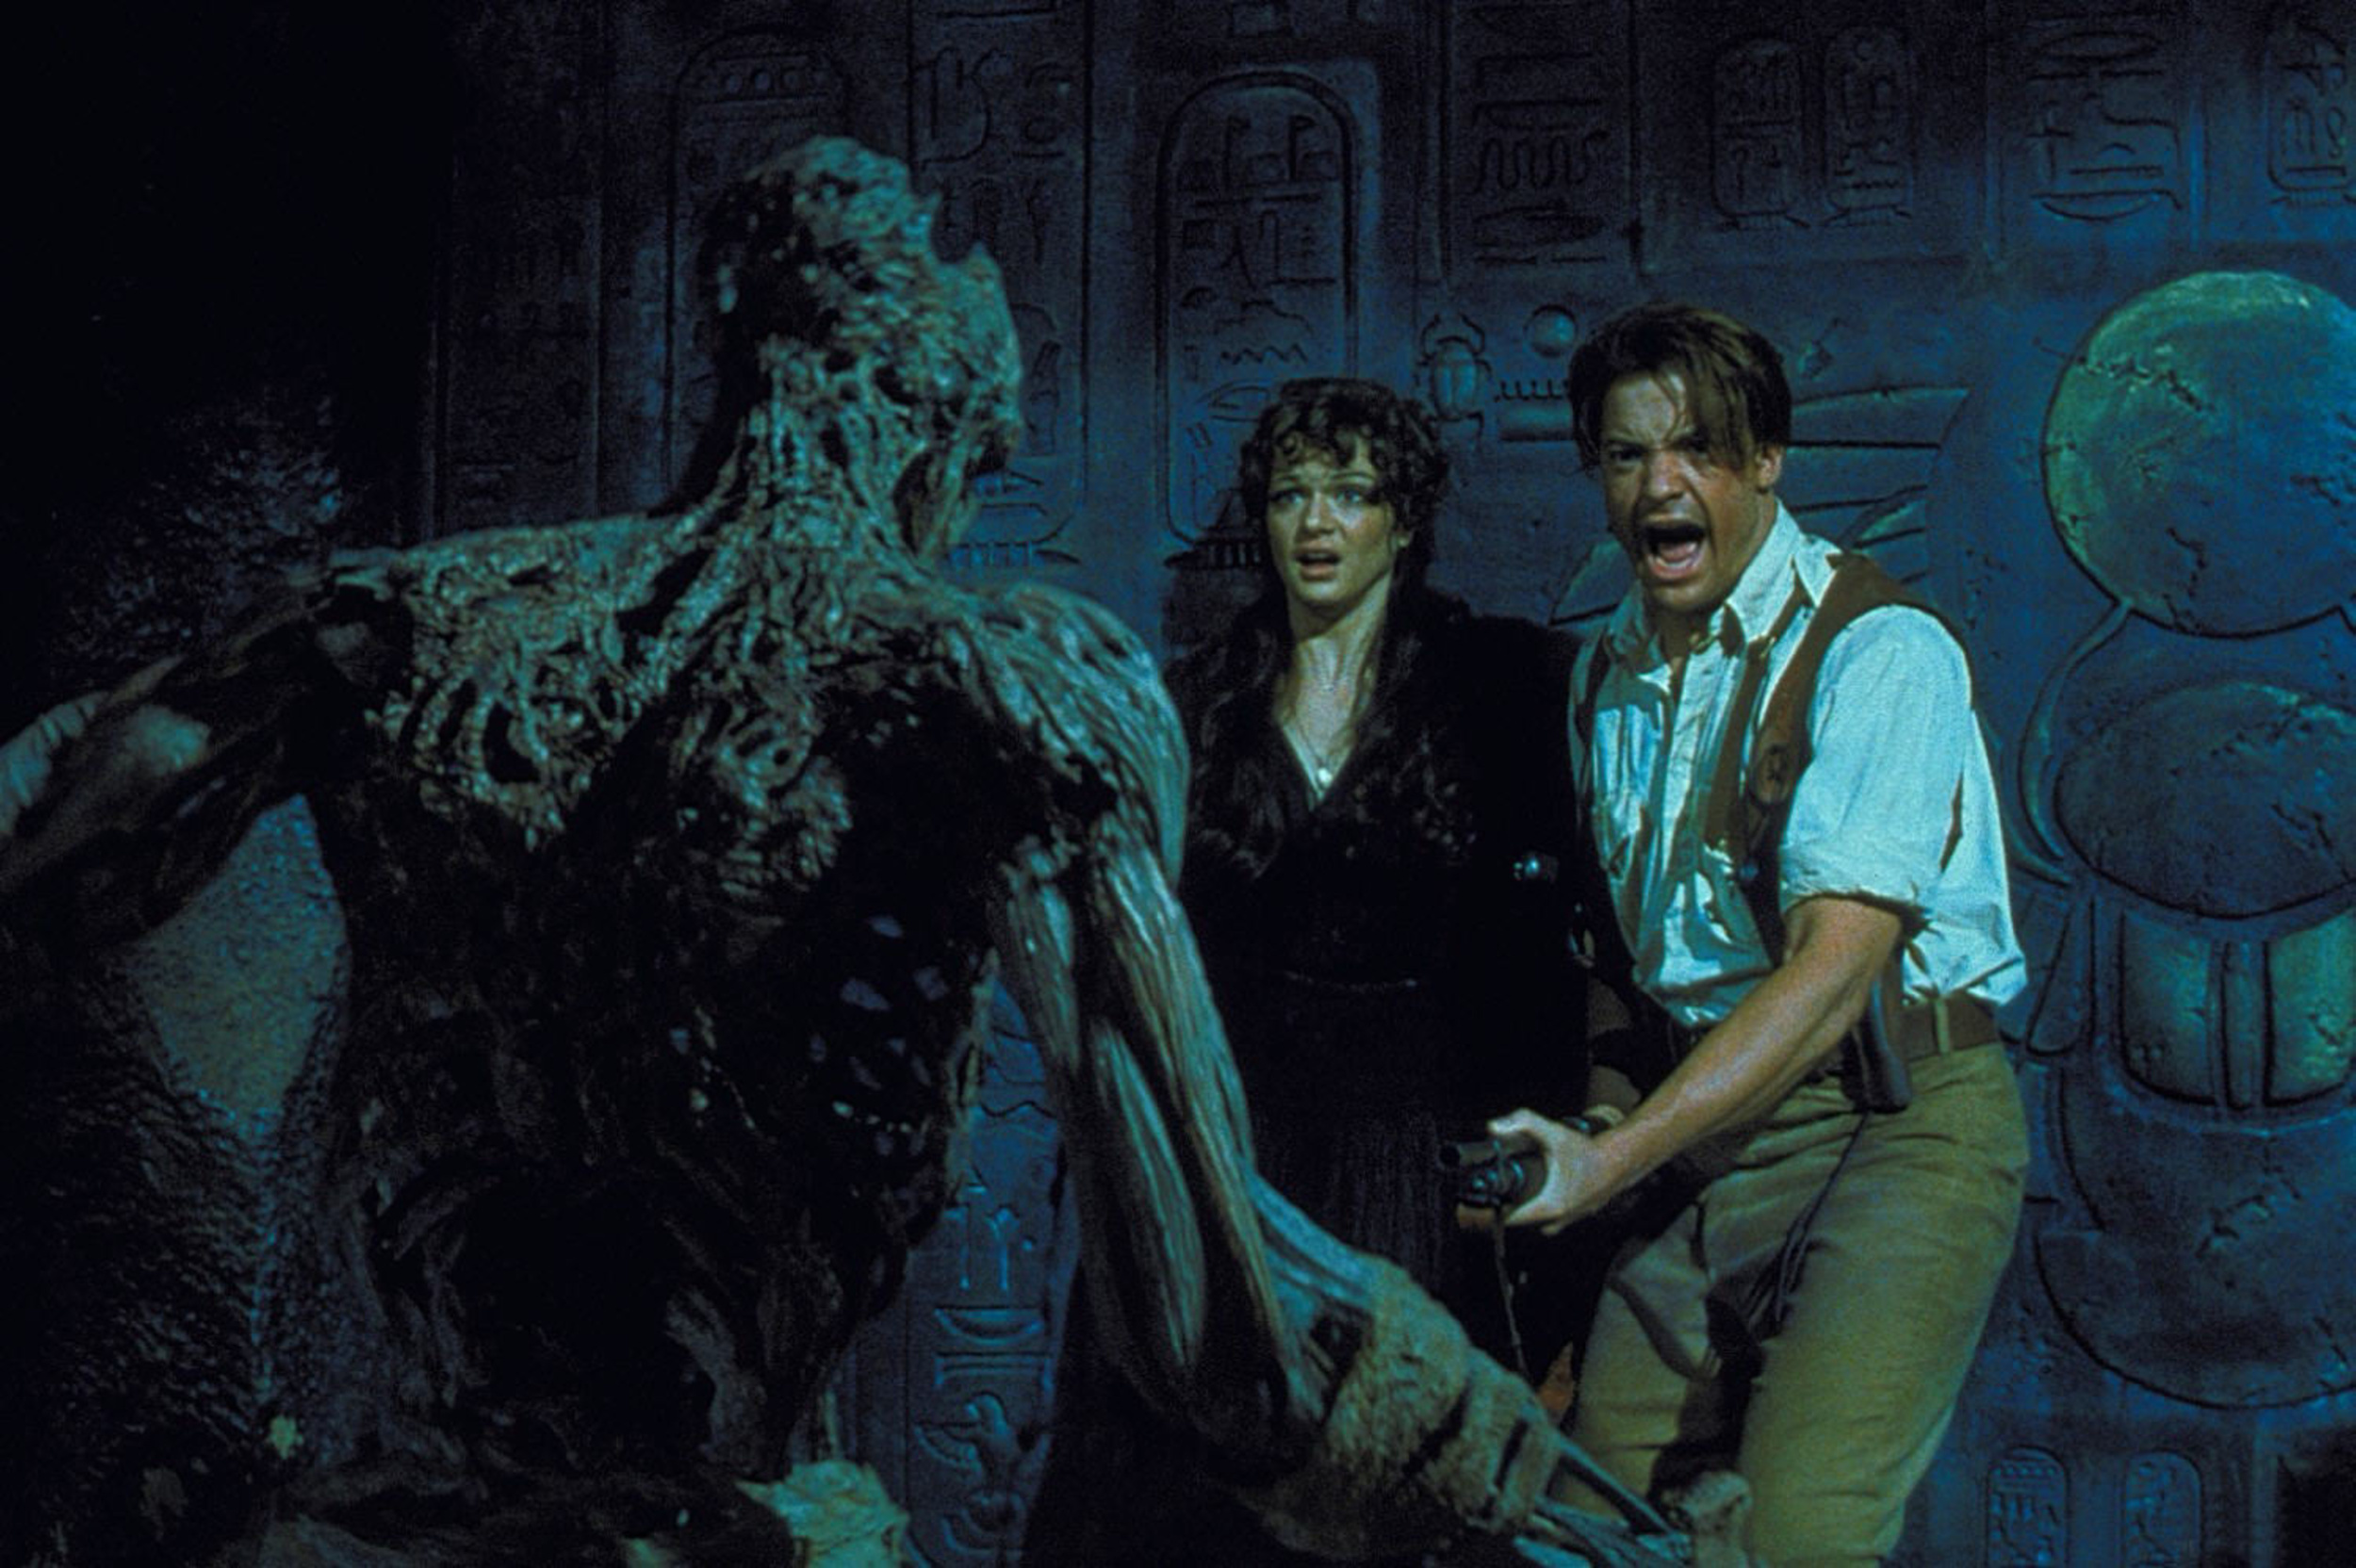 <p>Attempts to reboot <em>The Mummy</em> at Universal began in the 1980s. At the time, they were looking to start a low-budget horror franchise. On that front, they hired George A. Romero, the man behind<em> Night of the Living Dead</em> in 1987. The project couldn’t find its footing, though, Romero left, and the script was abandoned.</p><p><a href='https://www.msn.com/en-us/community/channel/vid-cj9pqbr0vn9in2b6ddcd8sfgpfq6x6utp44fssrv6mc2gtybw0us'>Follow us on MSN to see more of our exclusive entertainment content.</a></p>